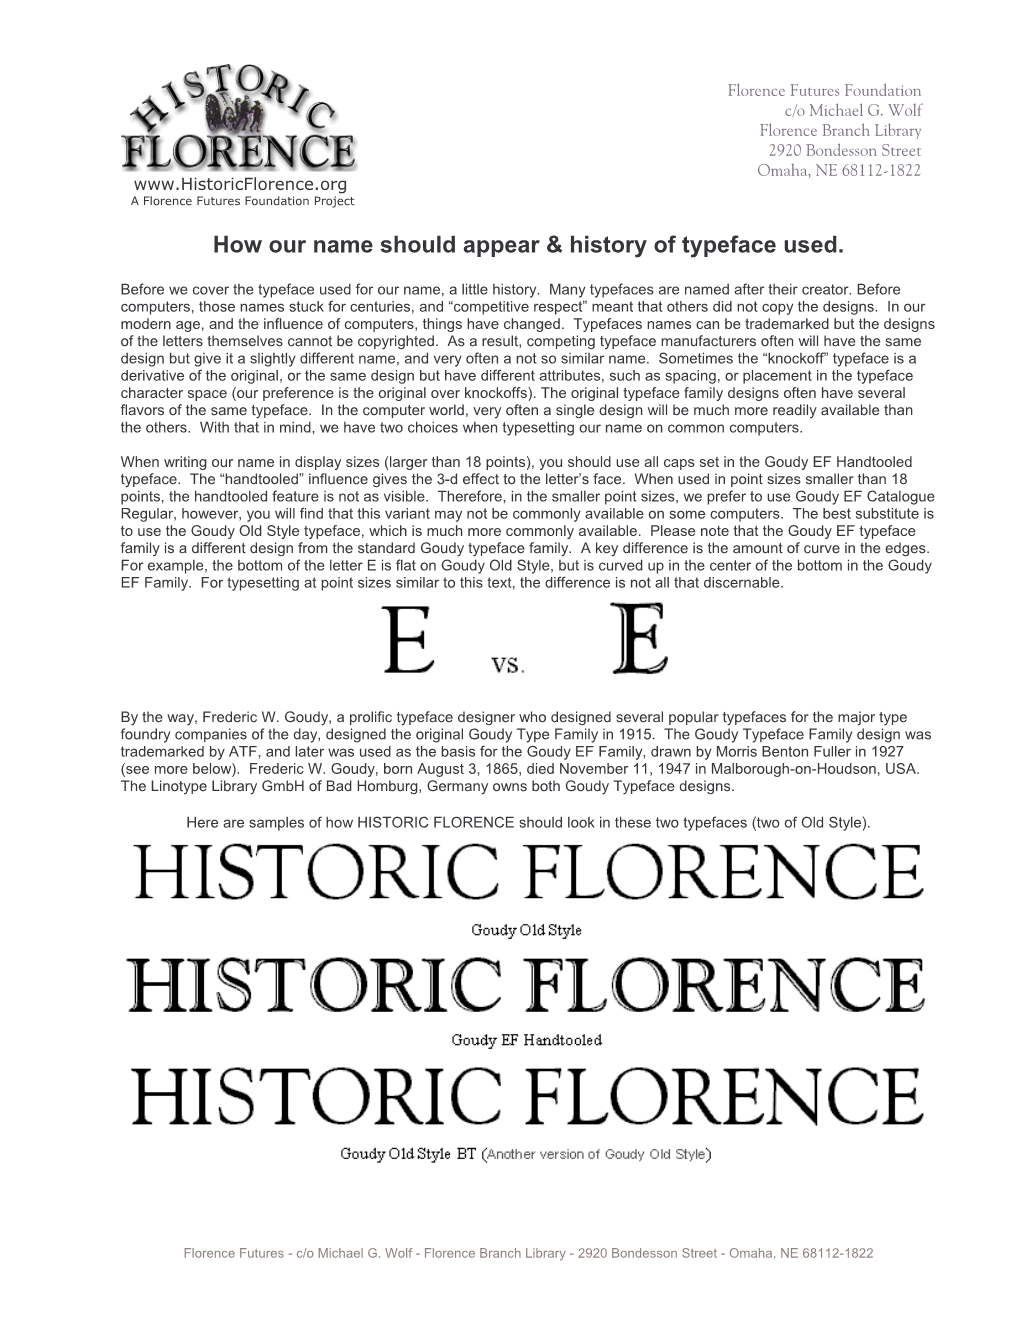 How Our Name Should Appear & History of Typeface Used